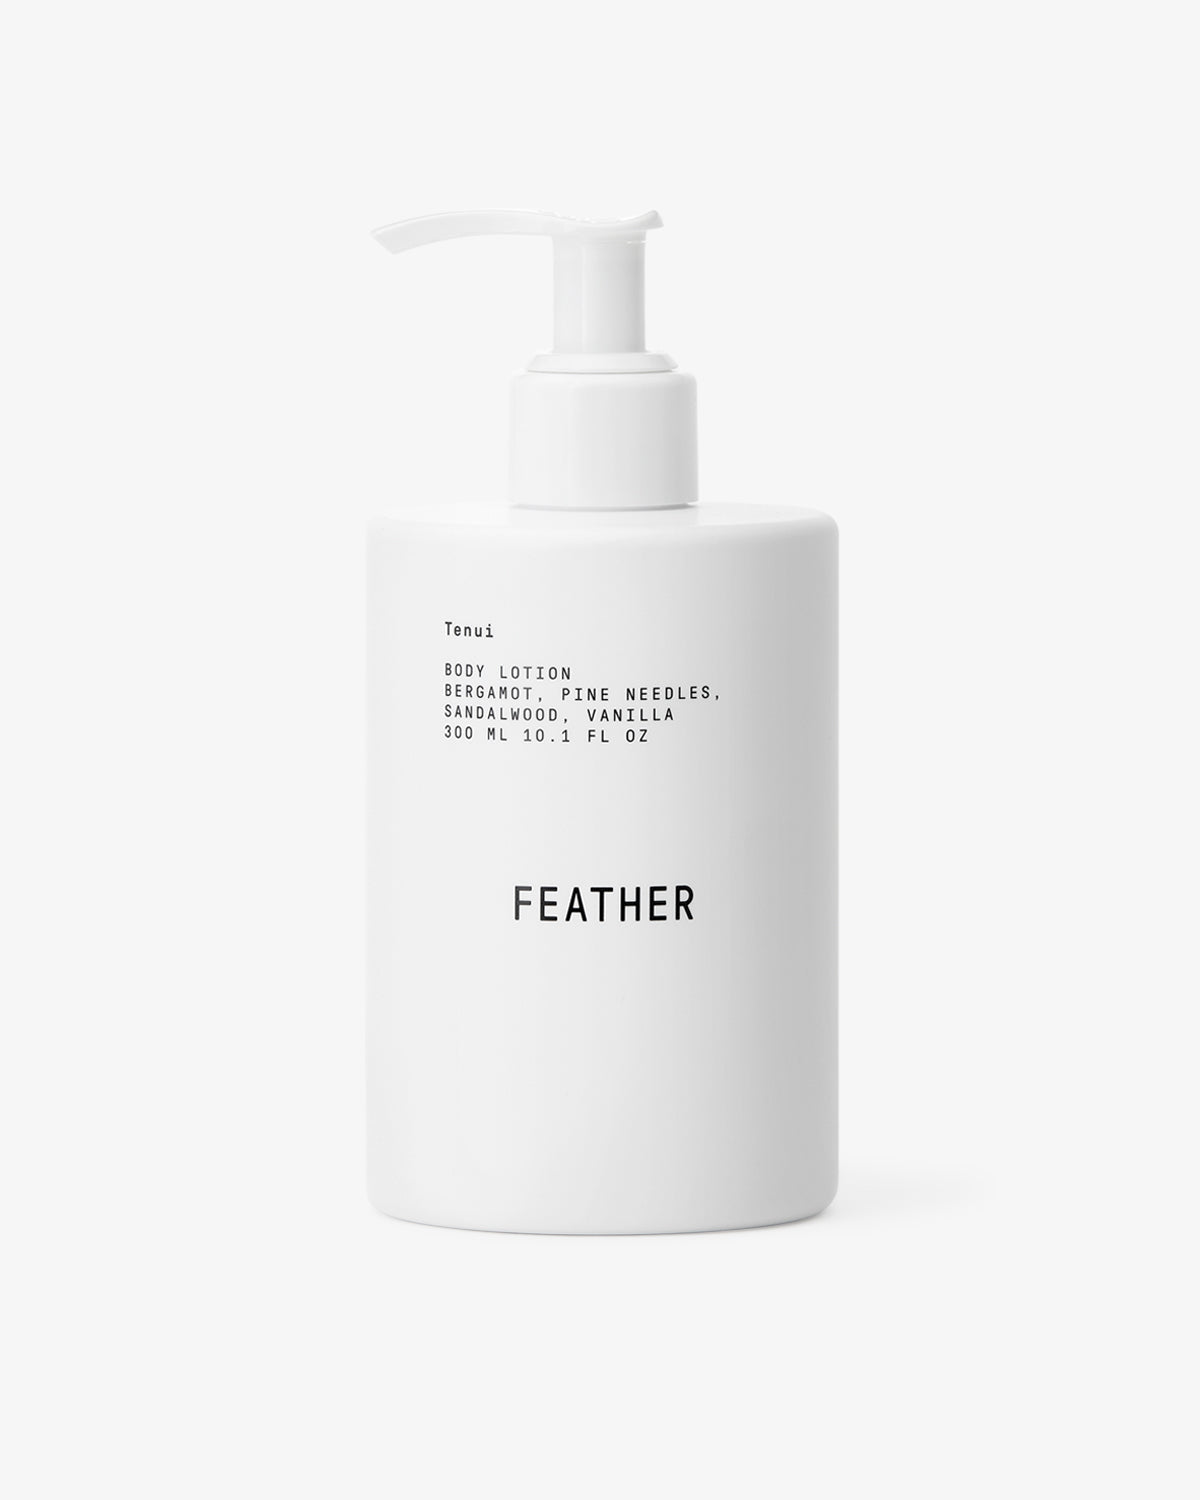 BODY LOTION 300ML : FEATHER